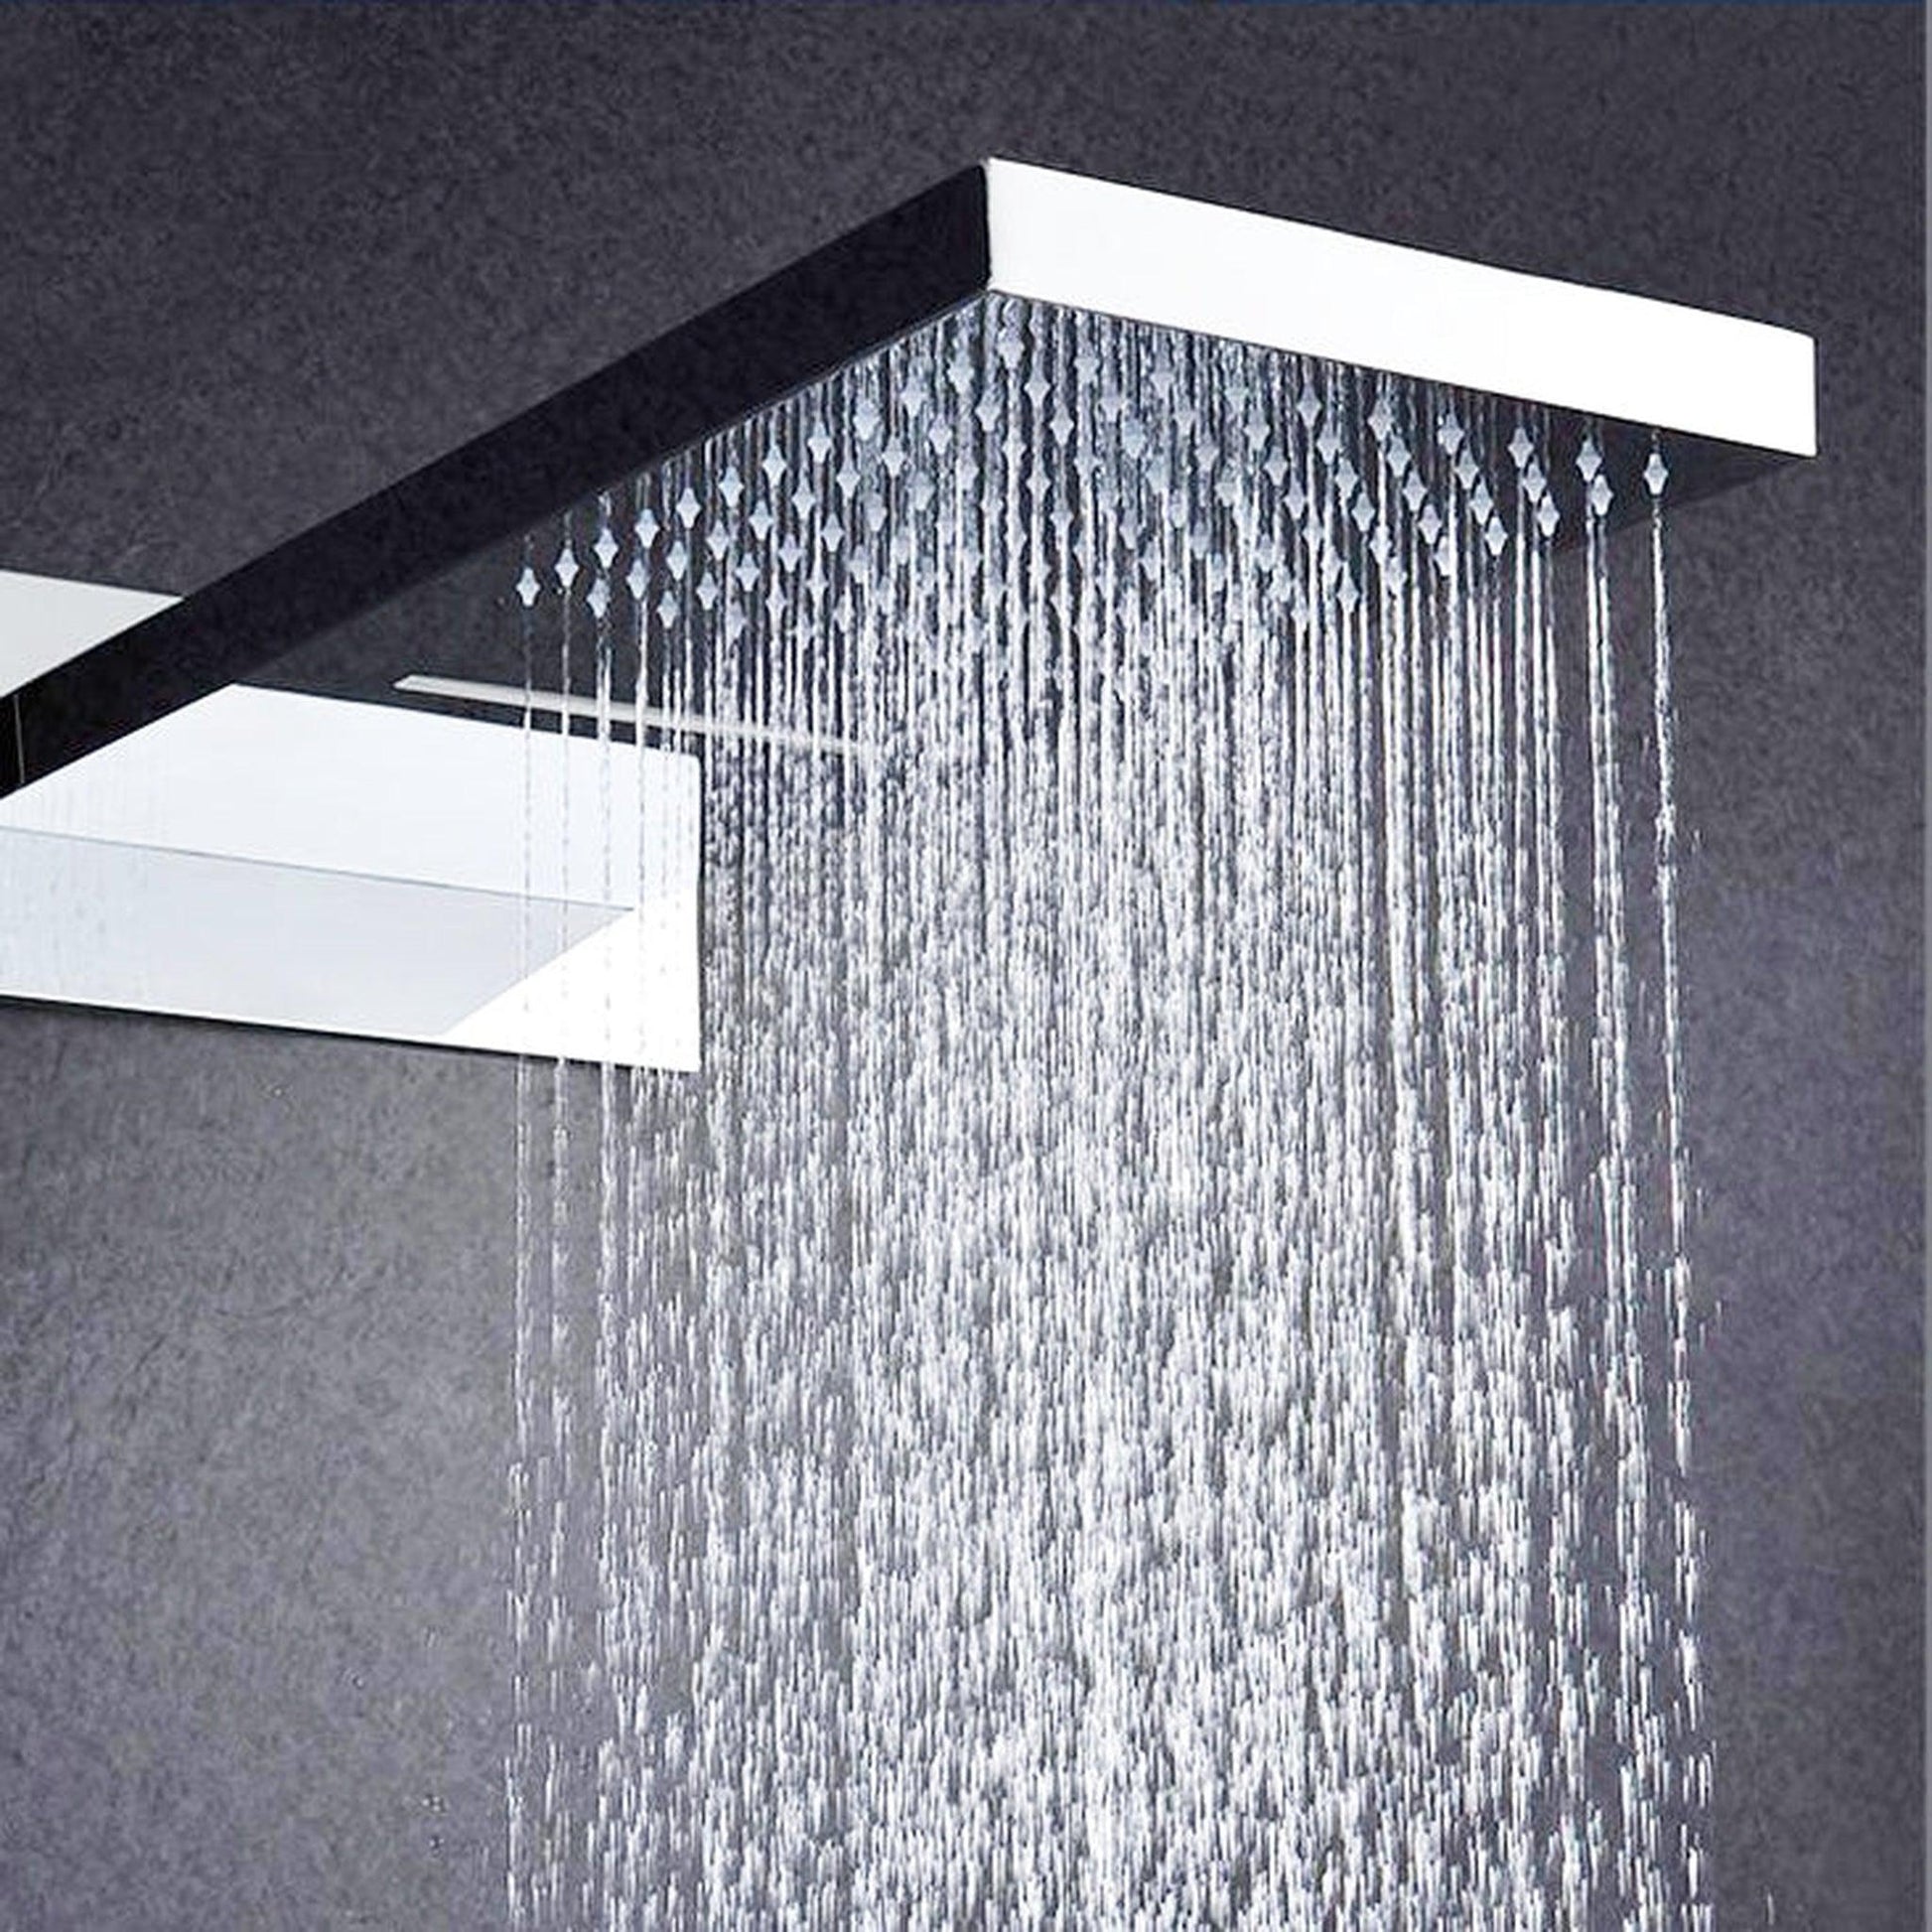 Fontana Warsaw Chrome Wall-Mounted Waterfall & Rainfall LED Shower System With 6-Jet Body Sprays and Hand Shower